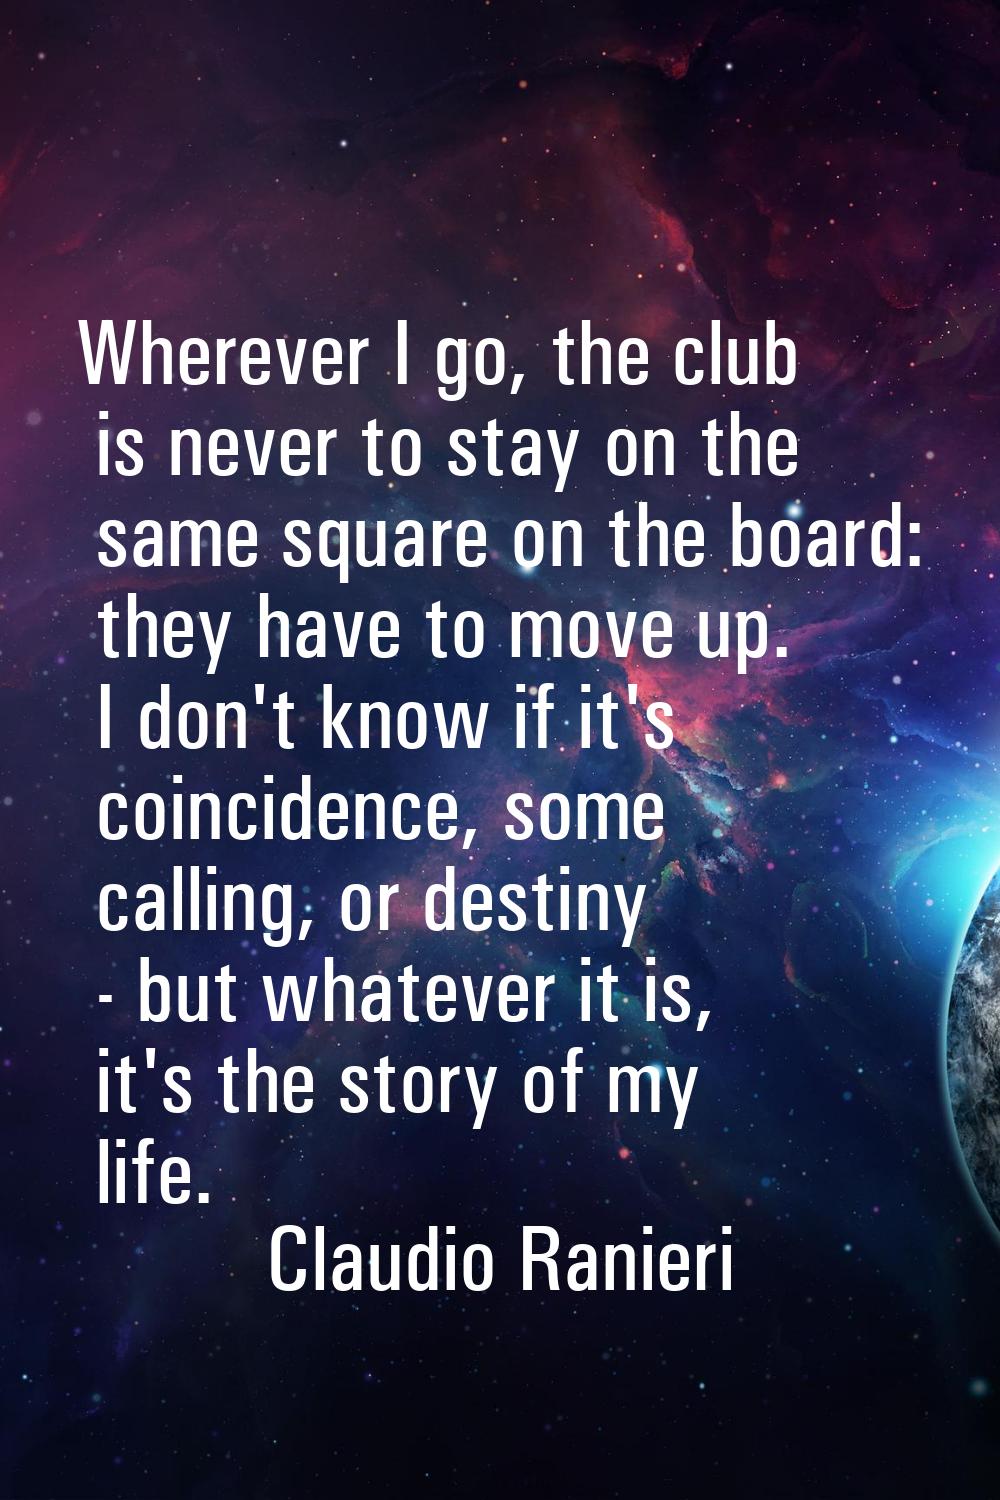 Wherever I go, the club is never to stay on the same square on the board: they have to move up. I d